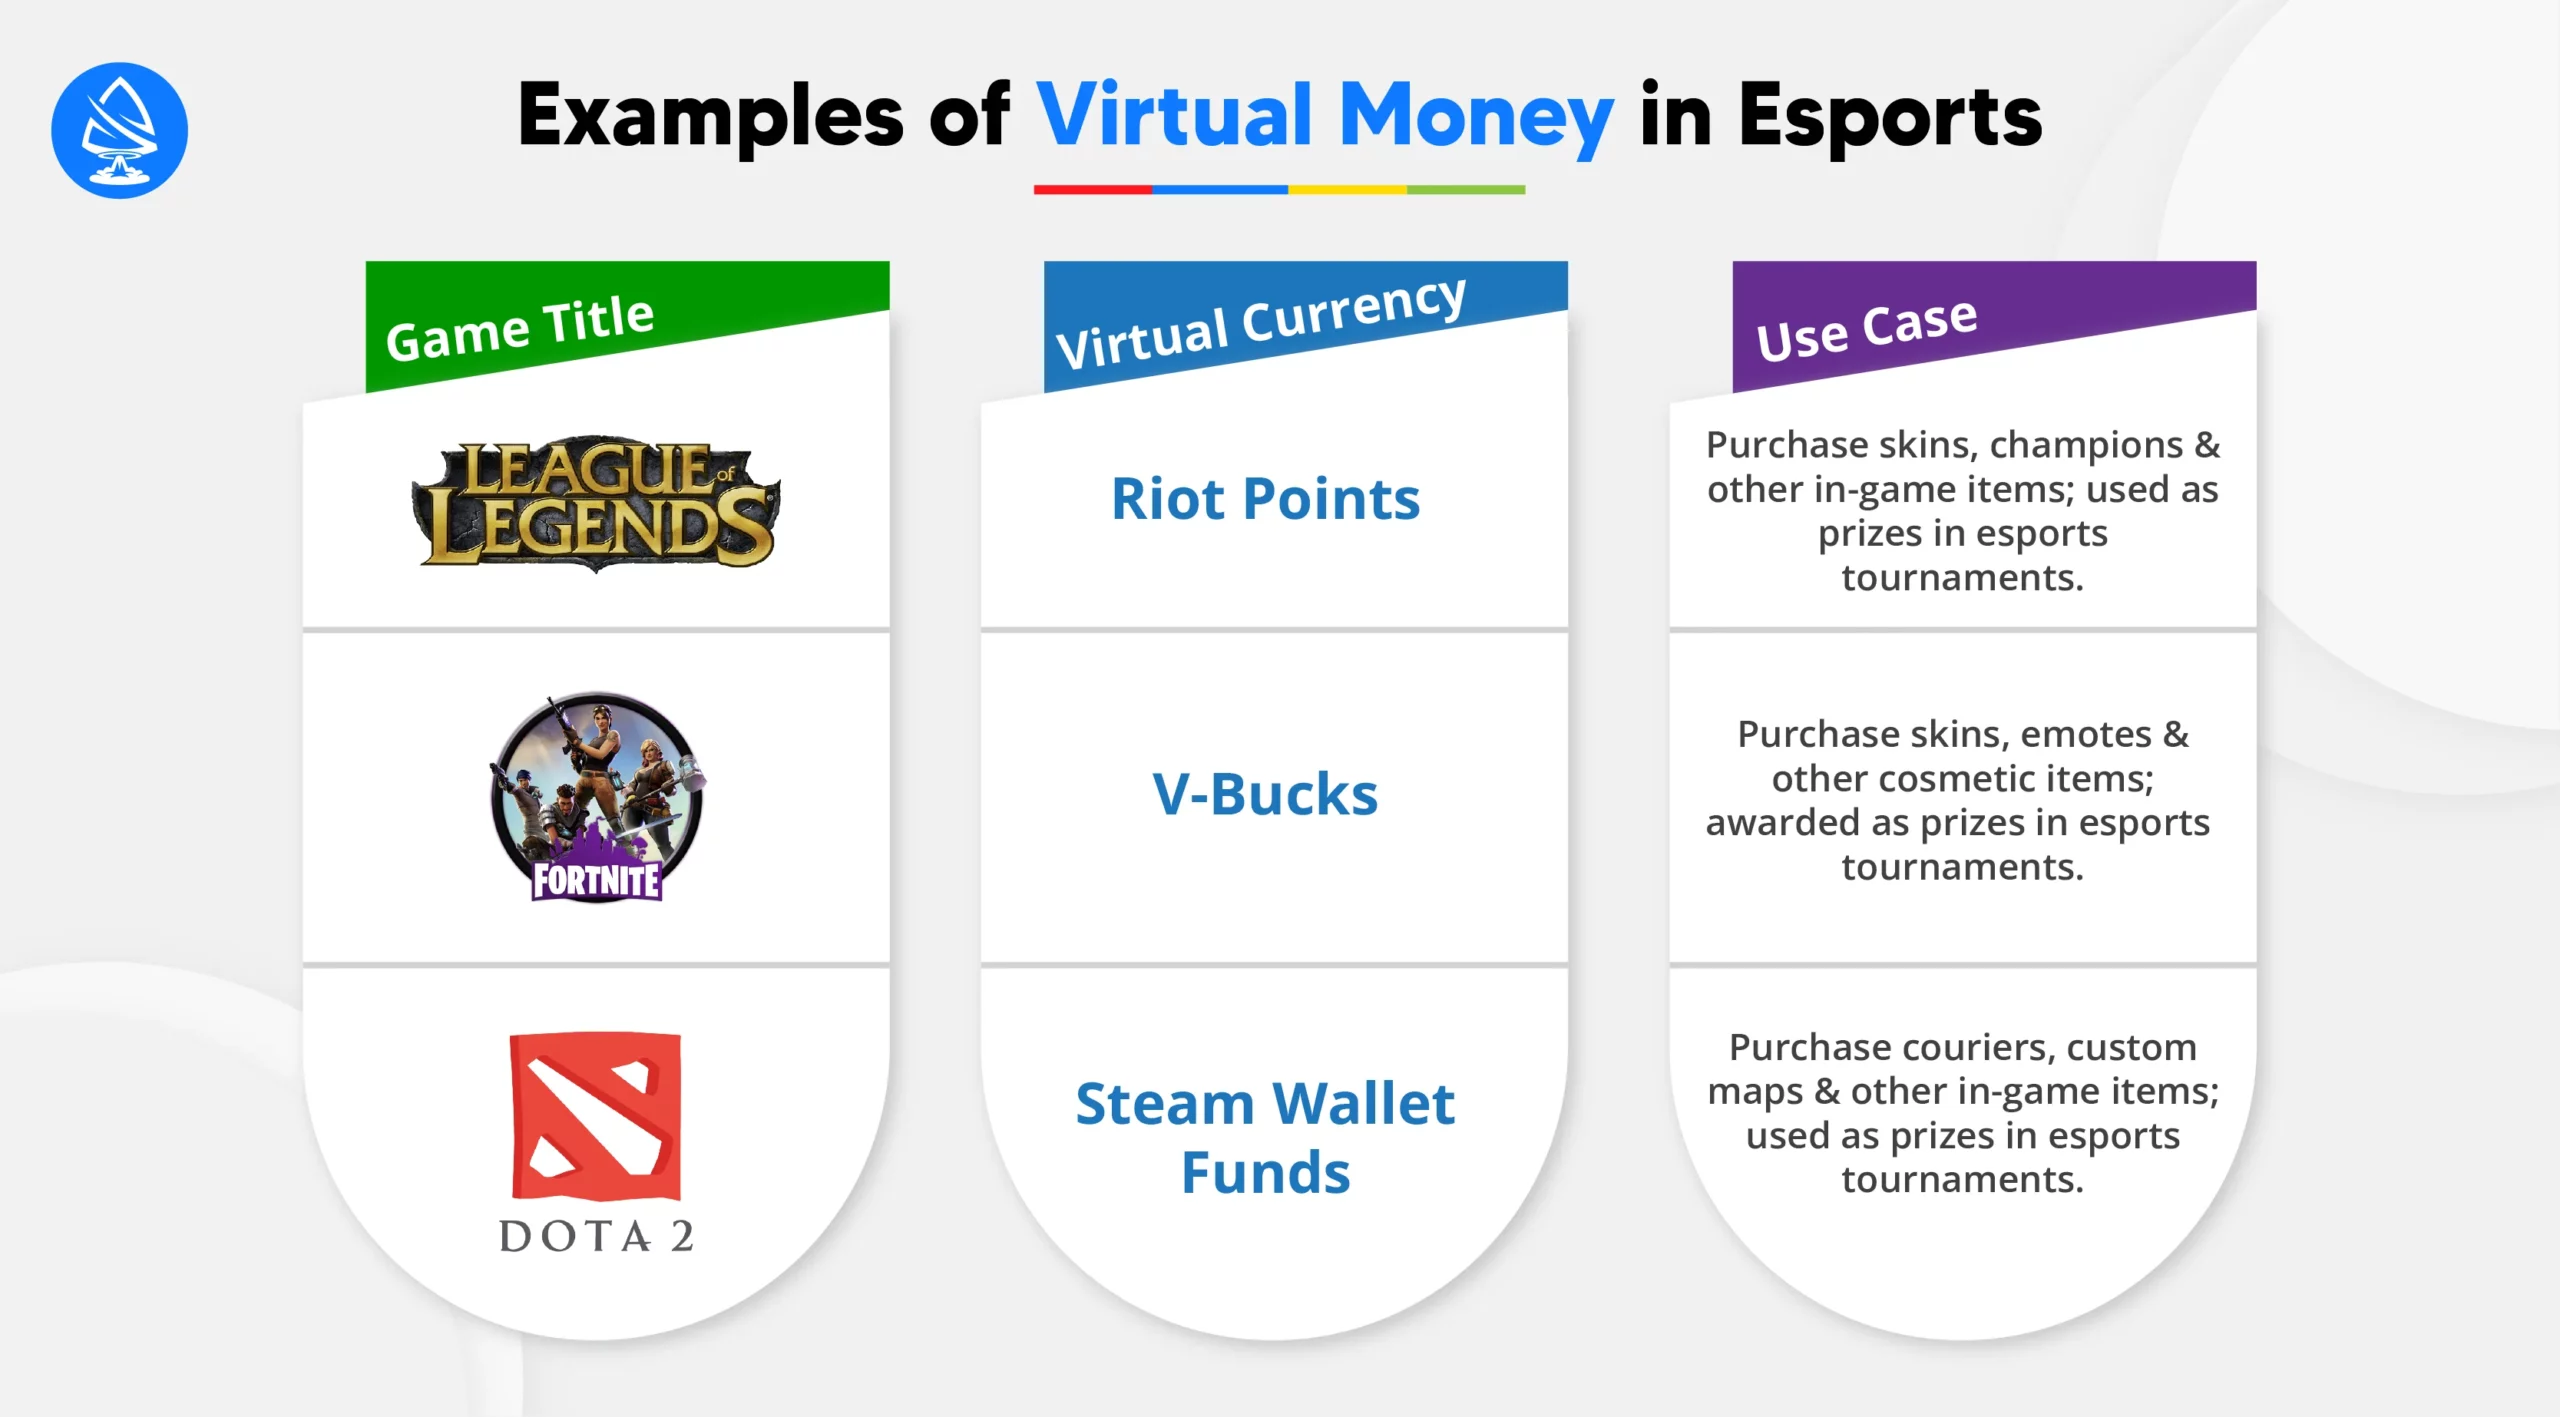 Examples of Virtual Money in Esports